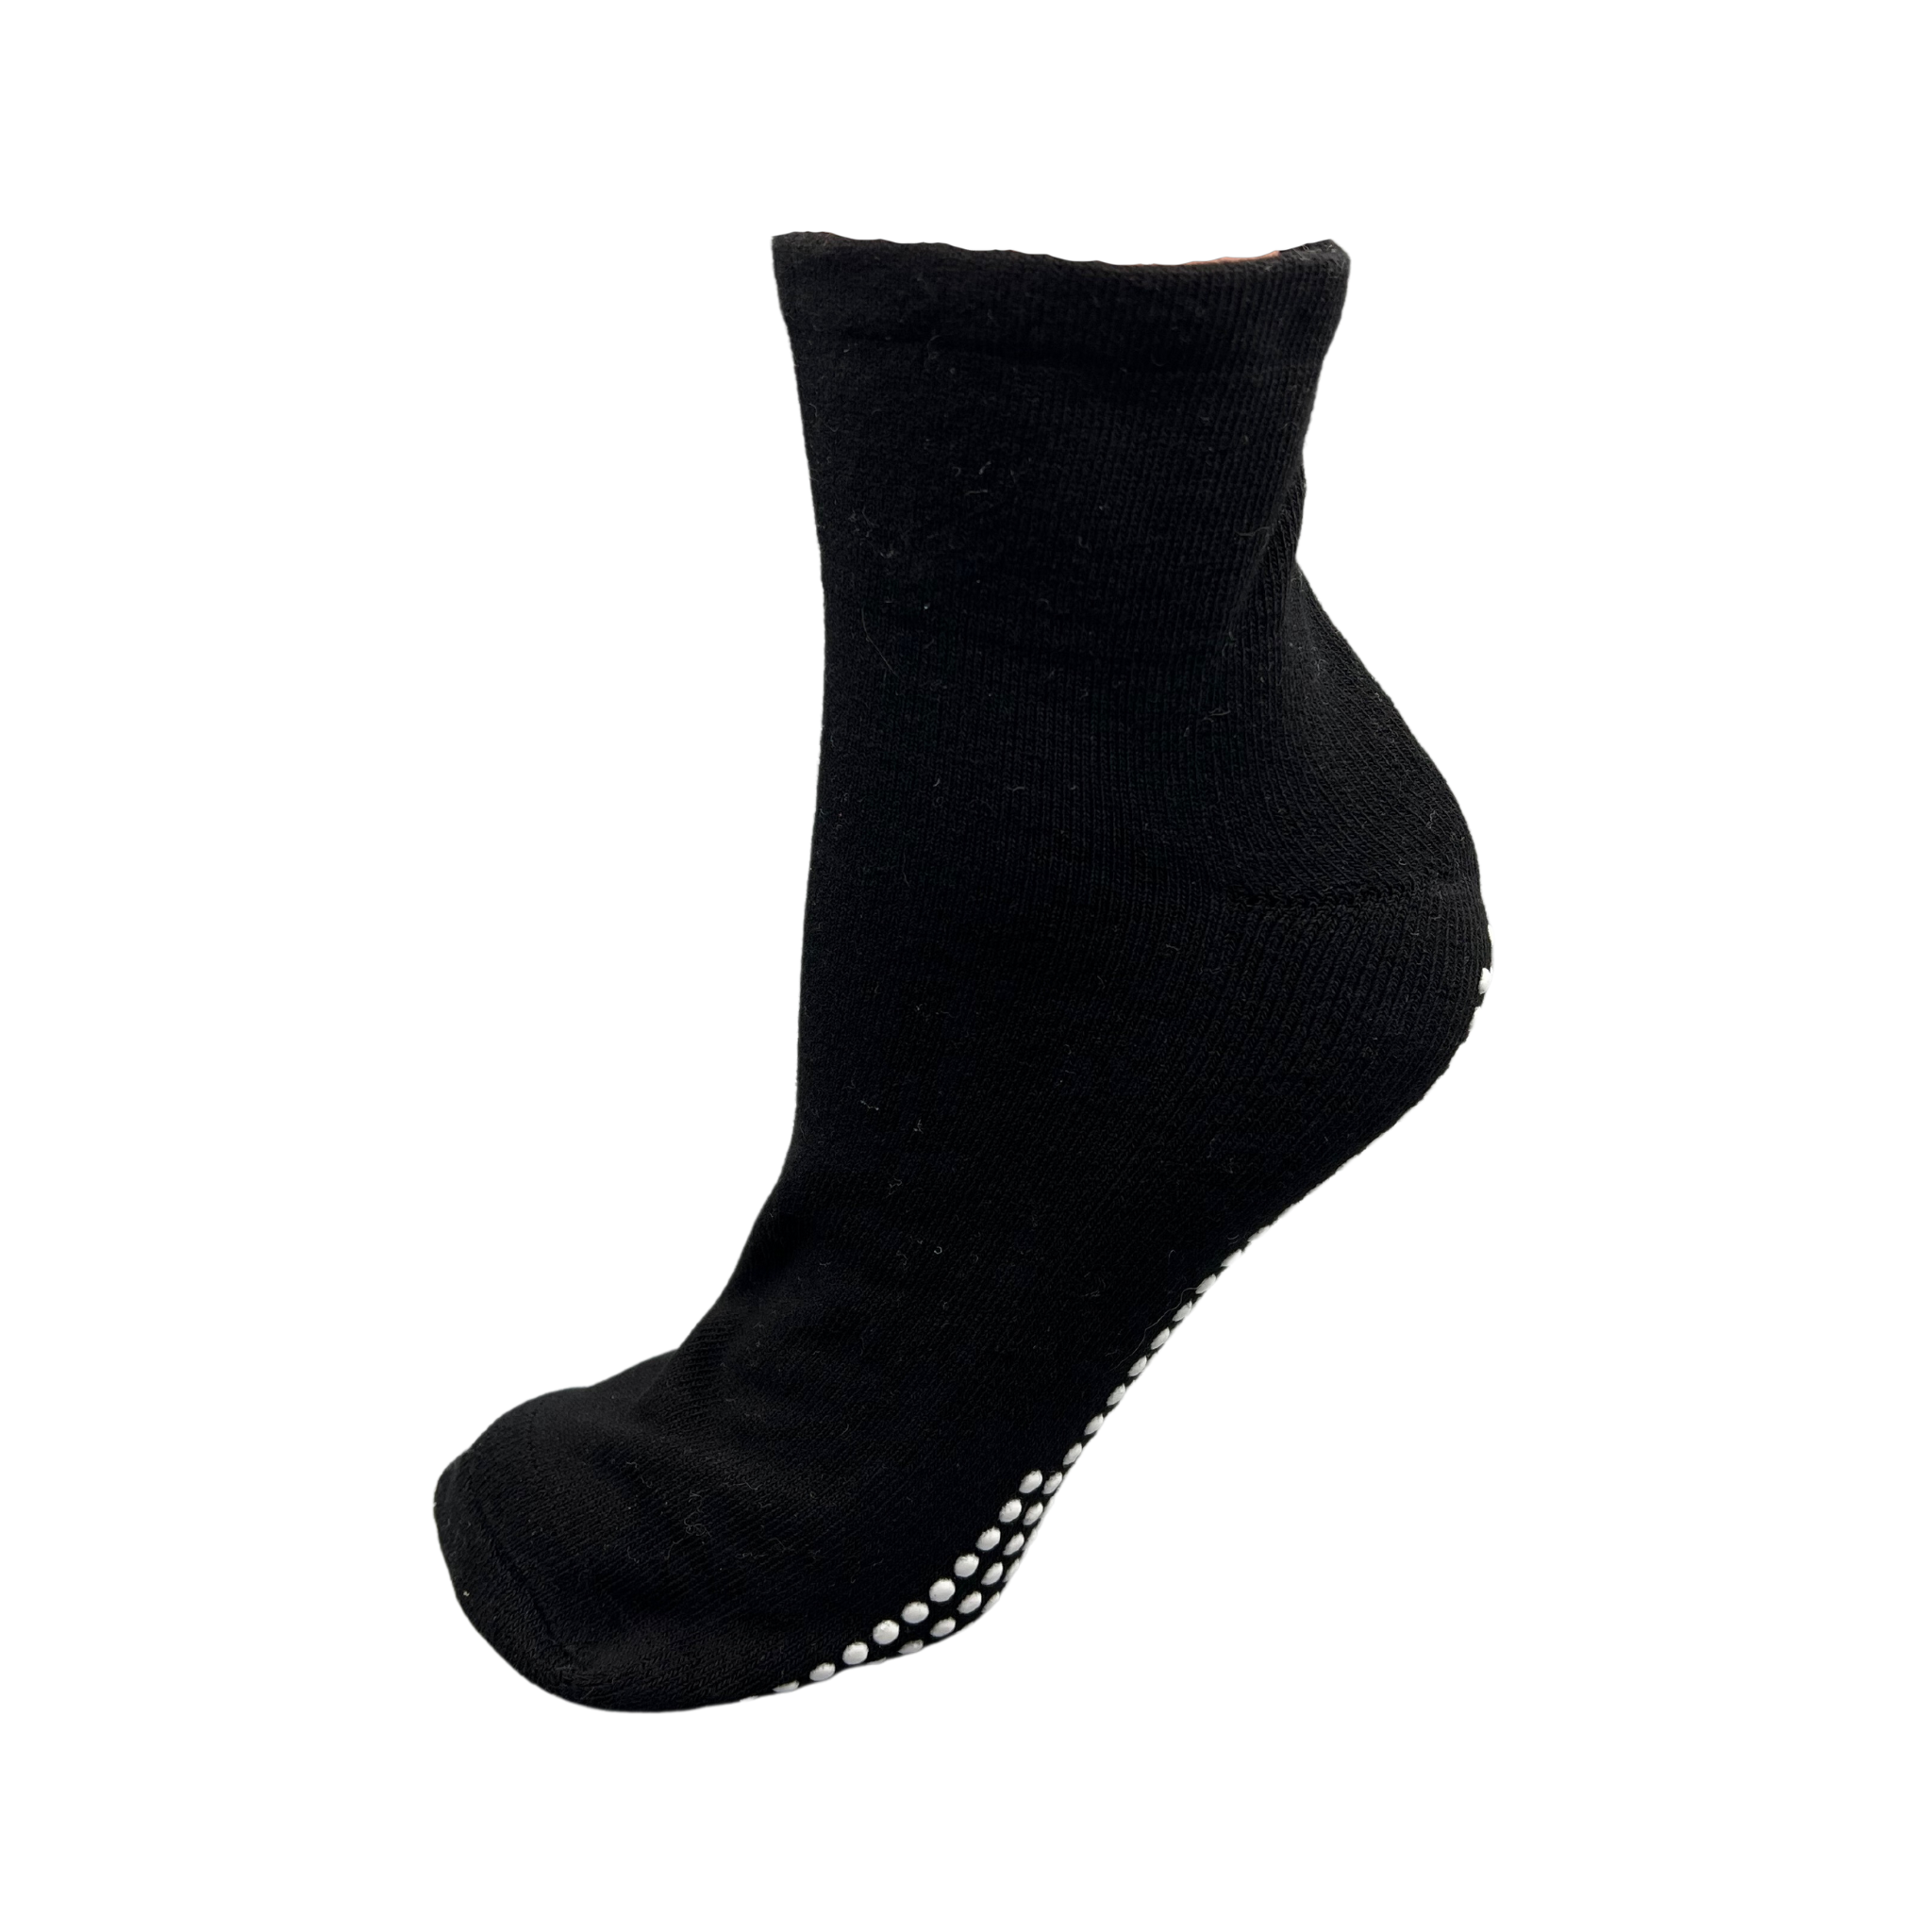 Non Slip Grip Socks Suitable for Hospital and Home